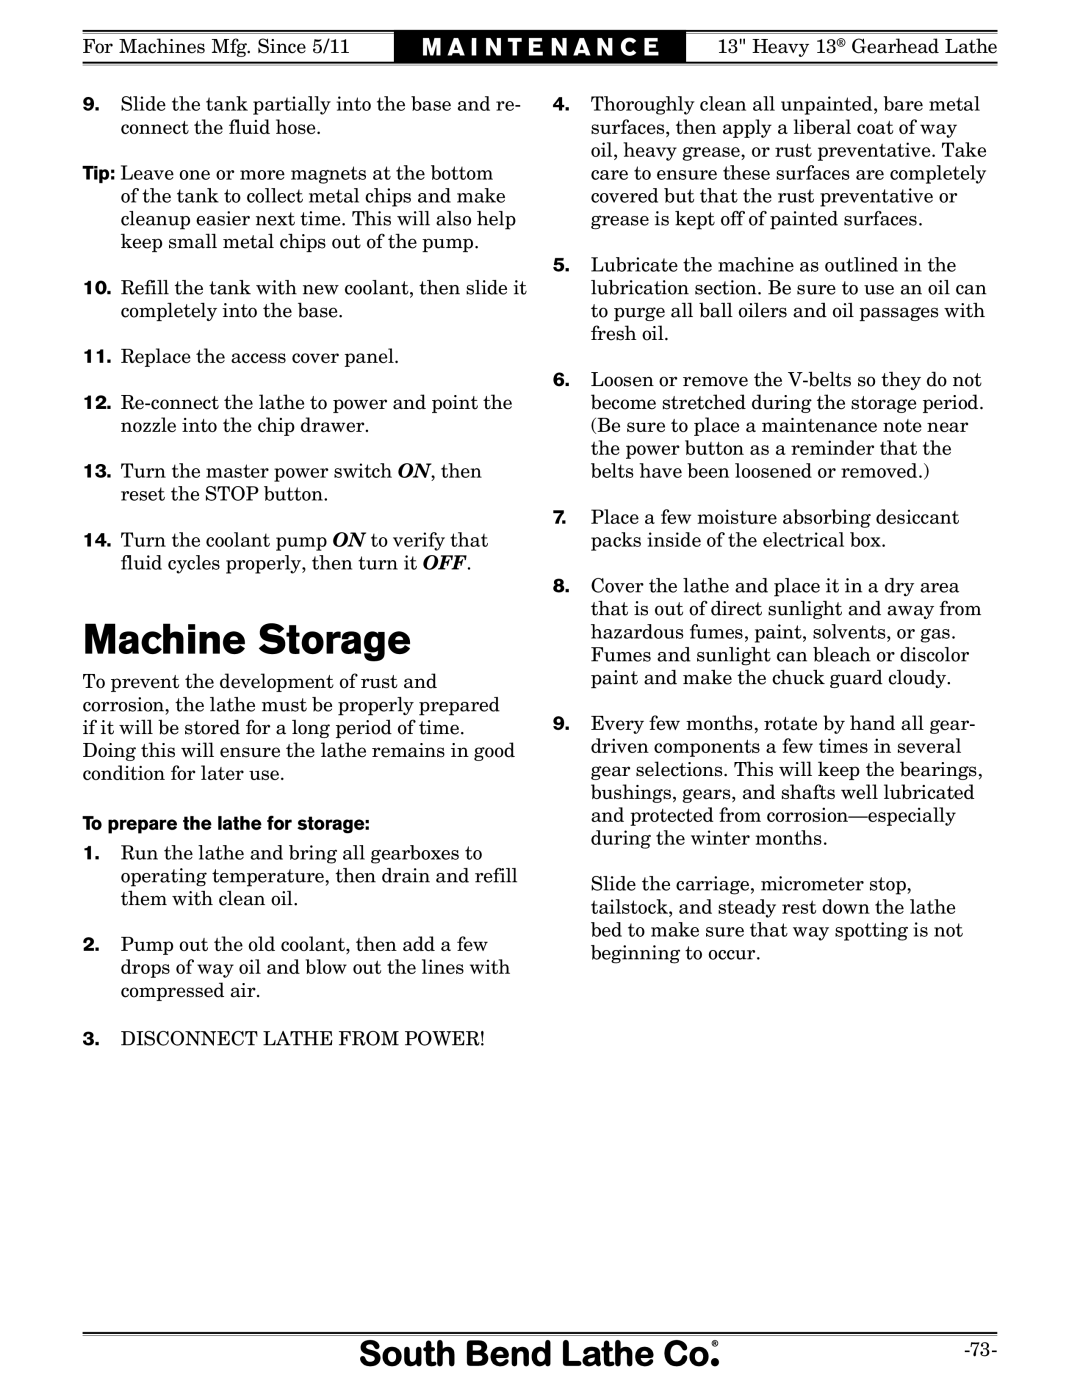 Southbend SB owner manual Machine Storage, To prepare the lathe for storage, M A I N T E N A N C E 